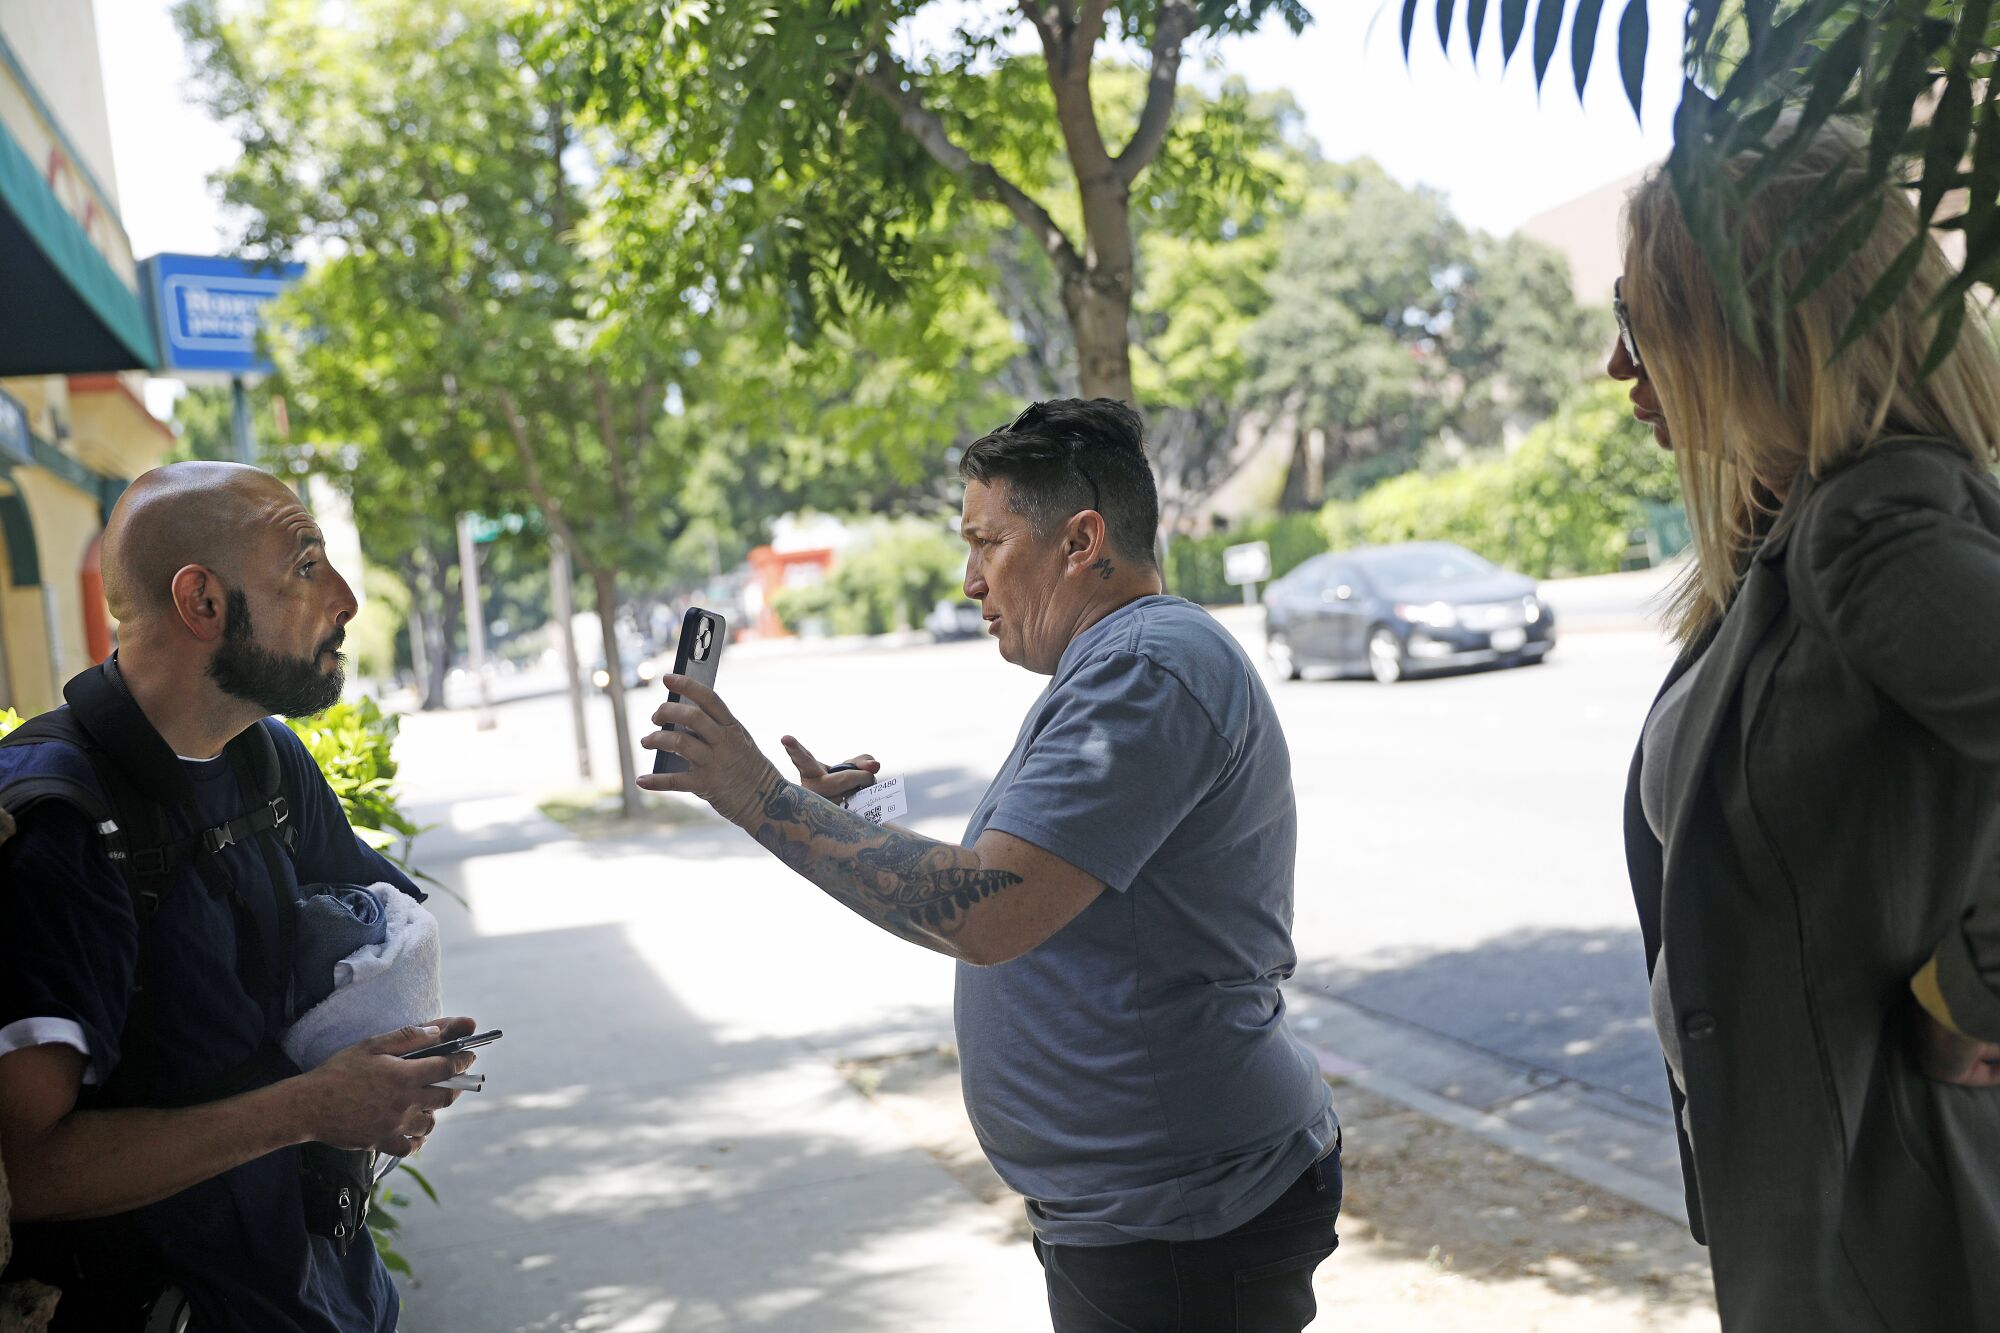 Vicki Lucas shows a photo of Sherry Hill's daughter to Jesus Franco, left, standing outside of a motel in Pasadena.